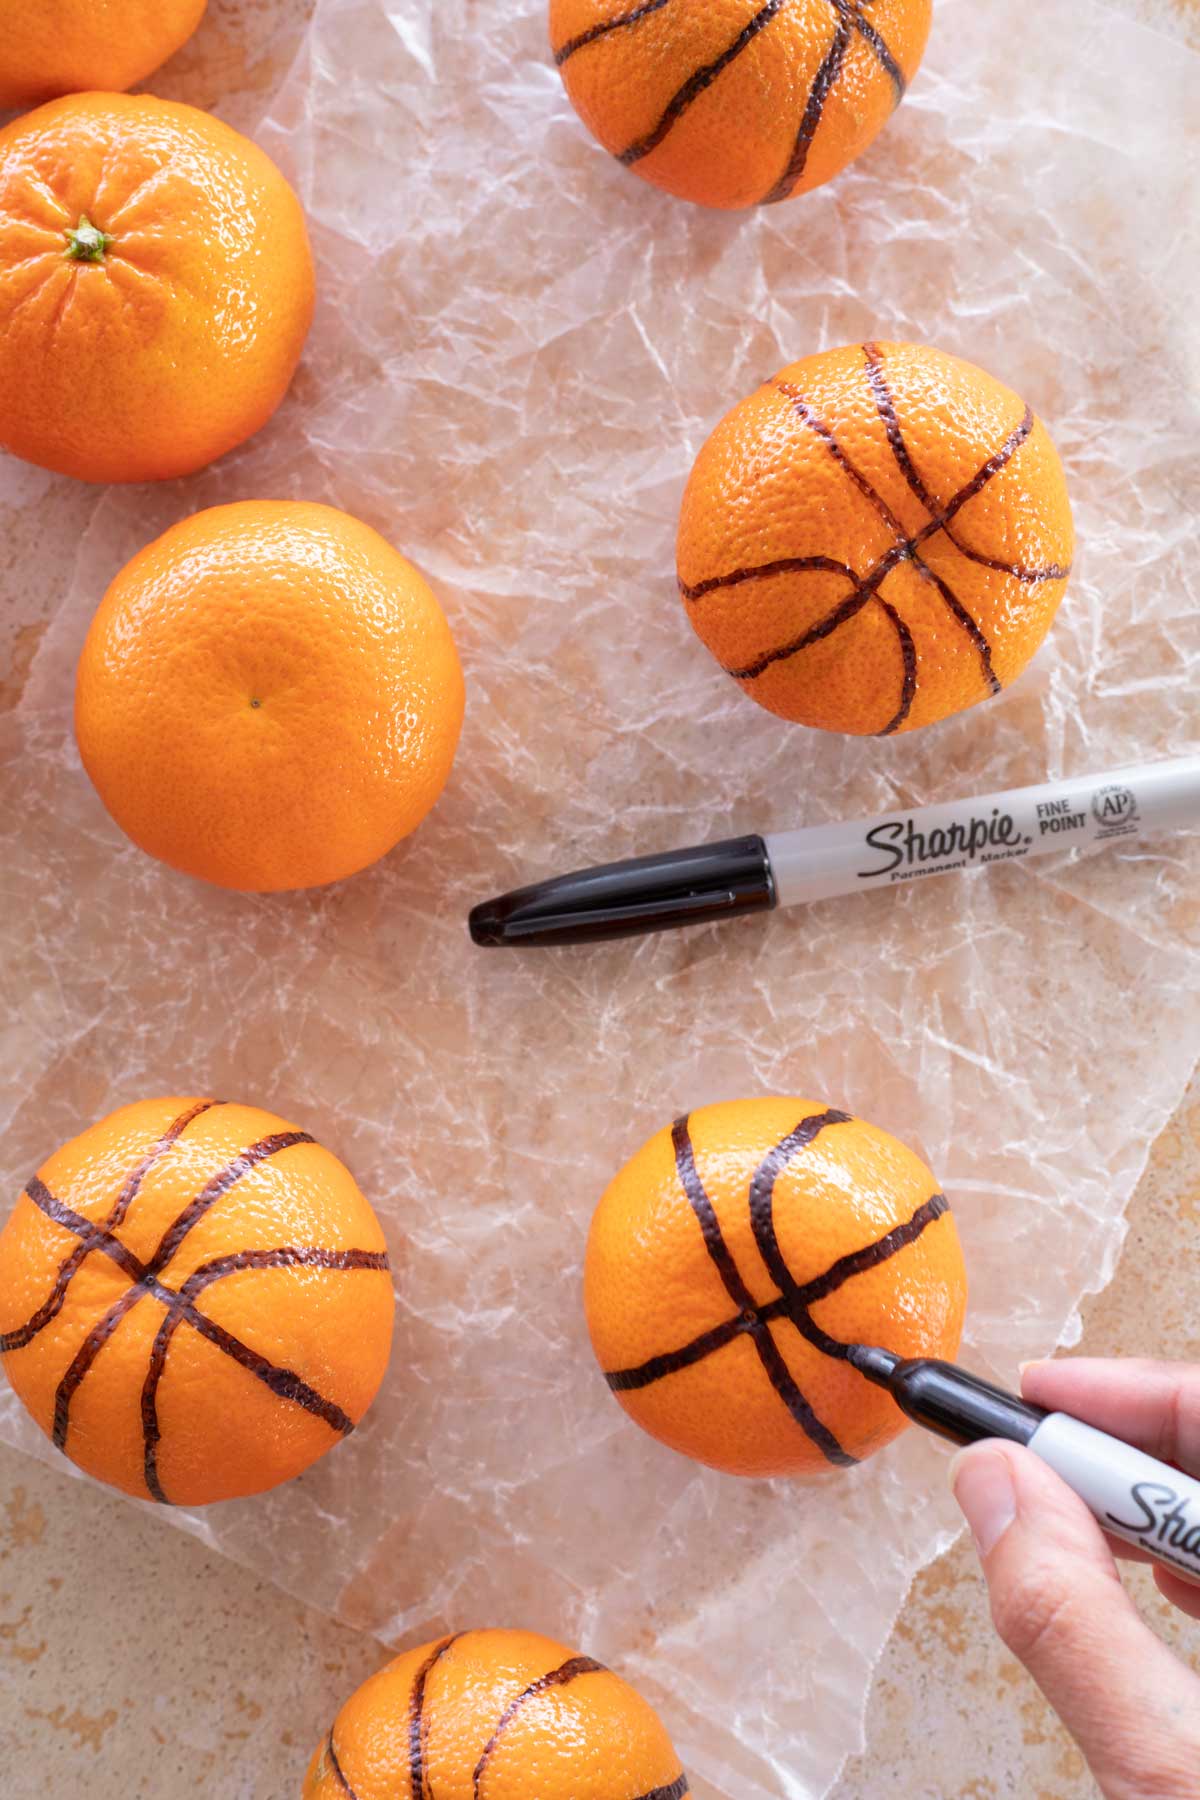 Adding additional curved lines to make clementine look like basketball.,